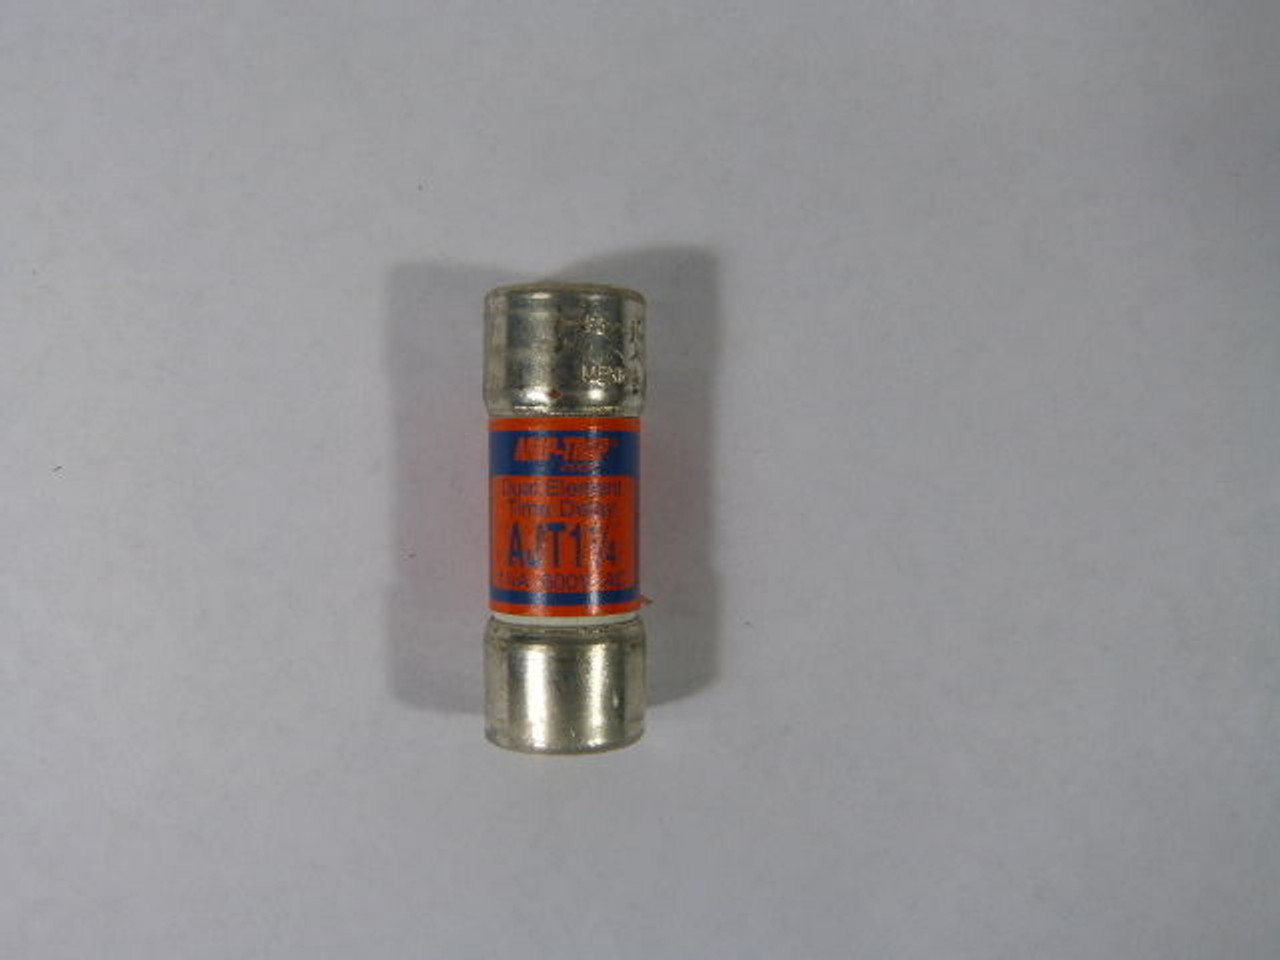 Amp-Trap AJT1-1/4 Time Delay Dual Element Fuse 1-1/4A 600V USED